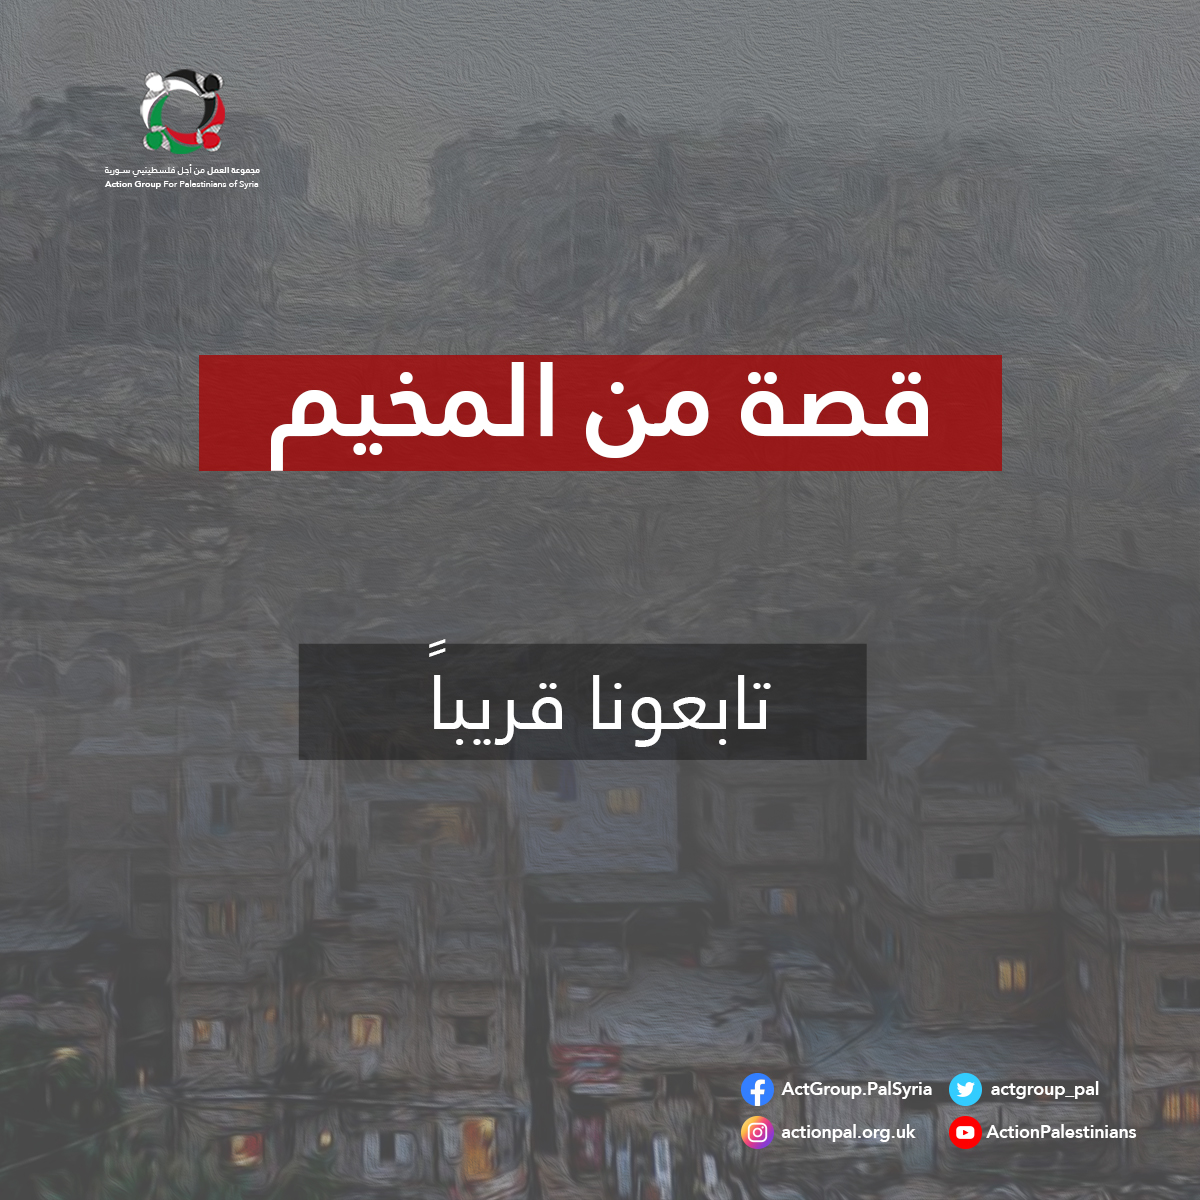 AGPS Launches New Project to Document Stories of Palestinians of Syria